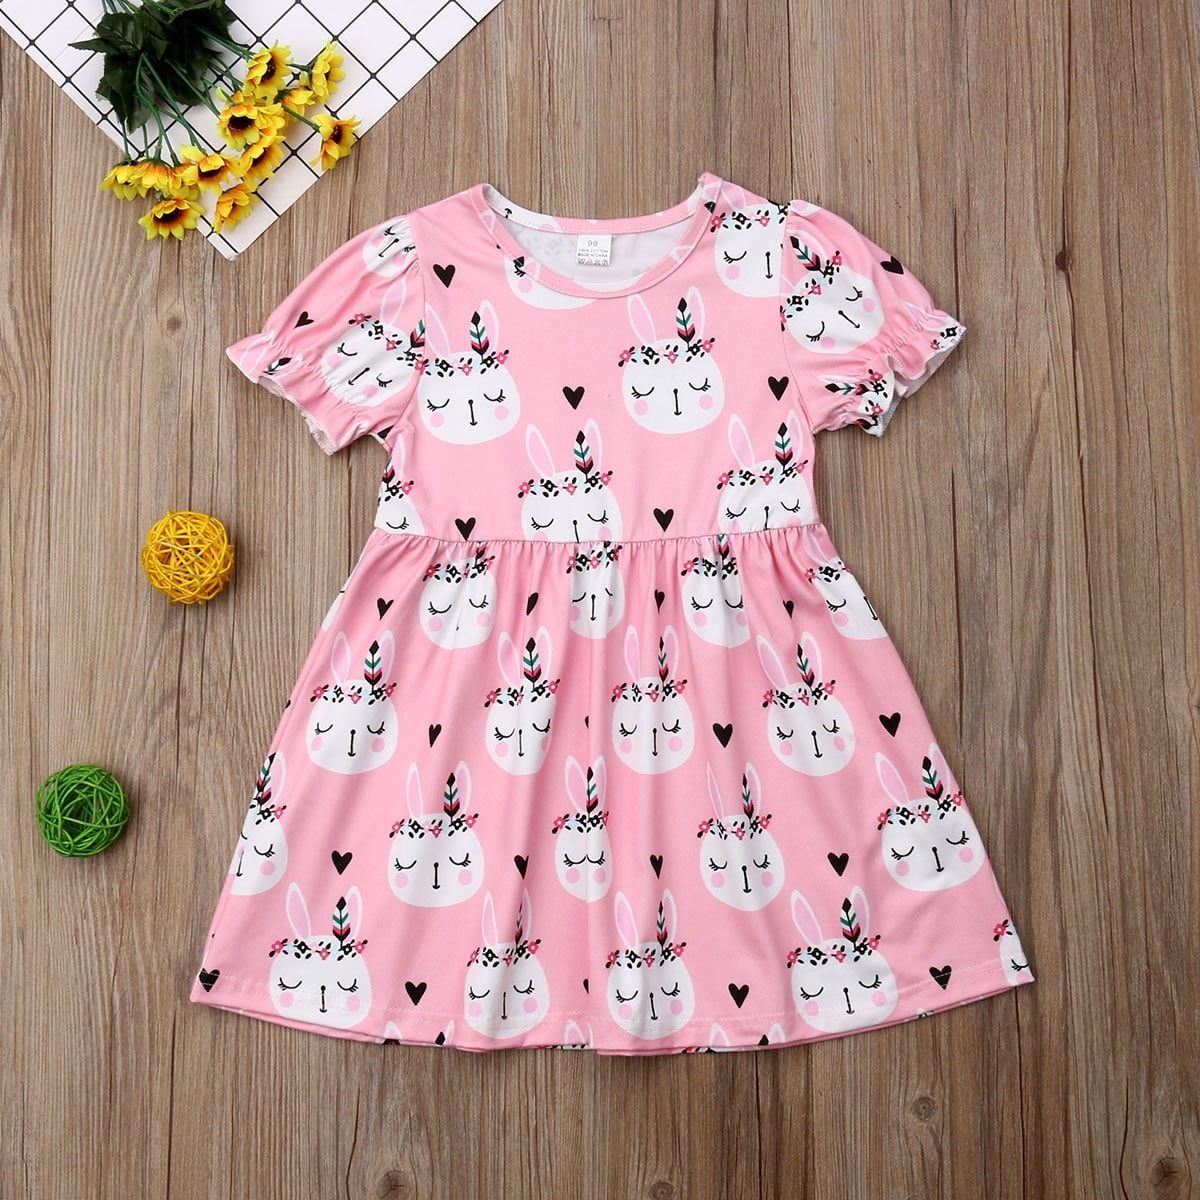 Toddler Kid Baby Girls Easter Dress Short Sleeve Easter Bunny Print Pink Dresses Clothes